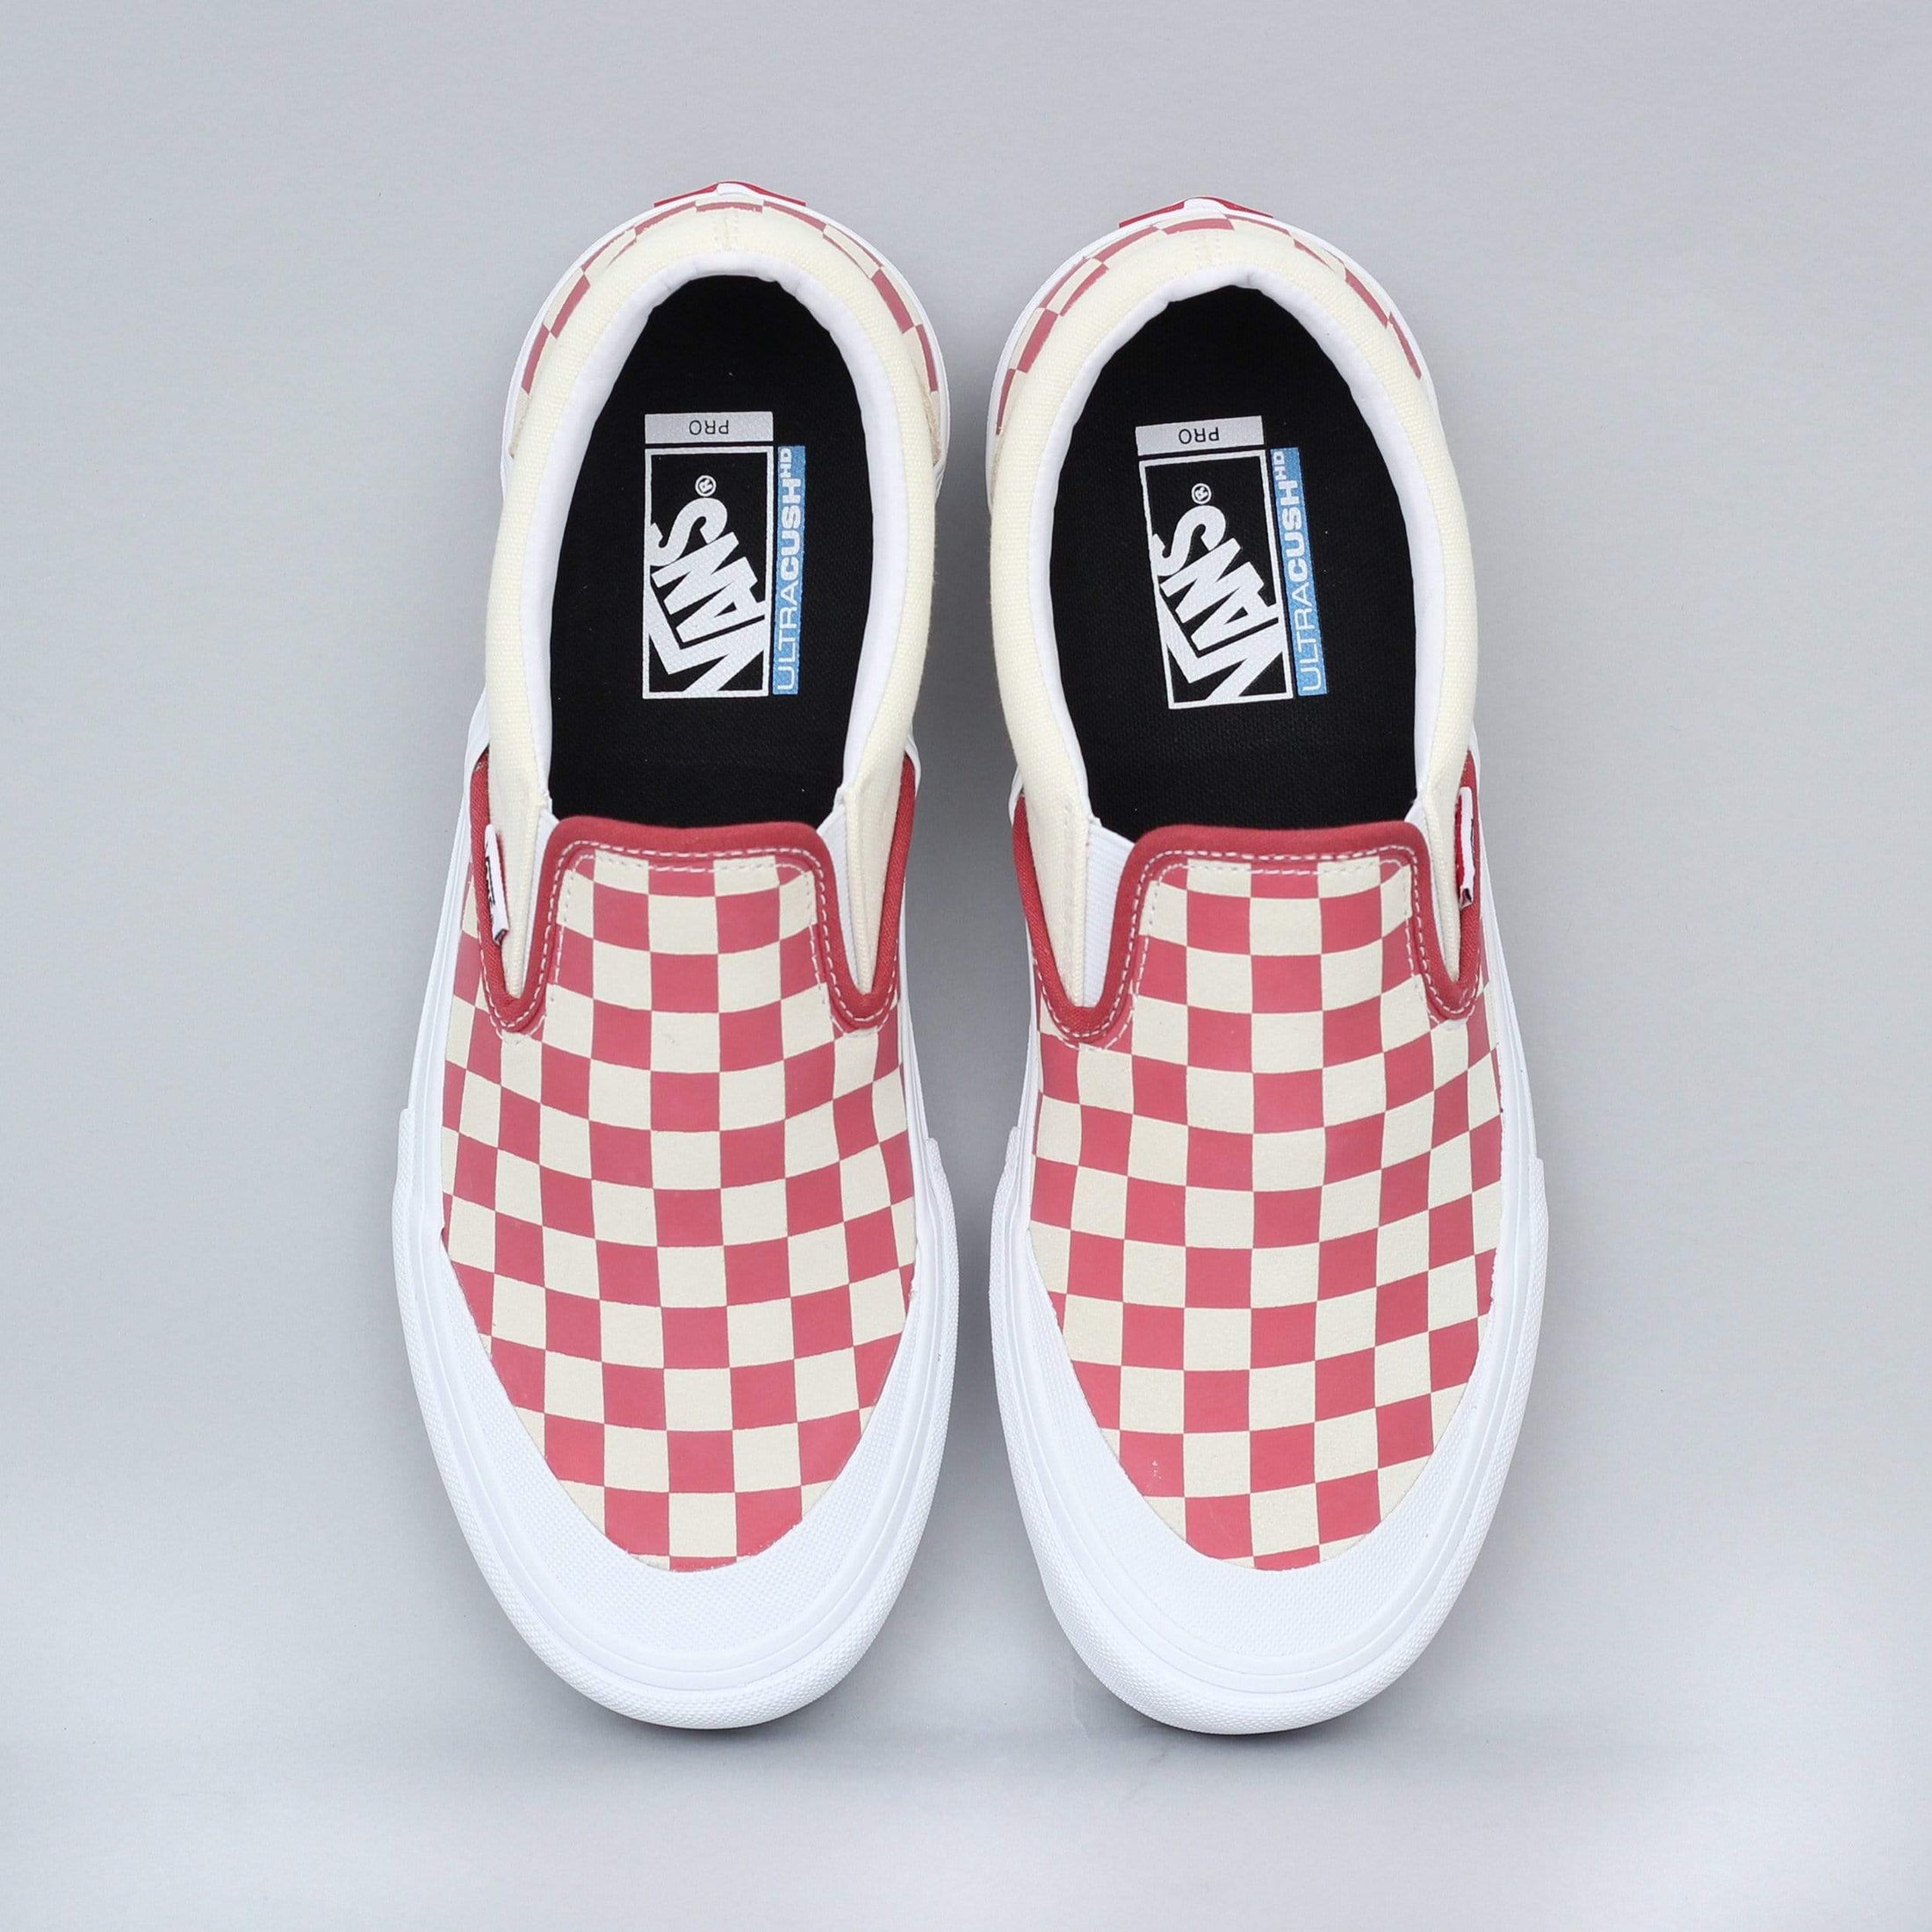 Vans Slip-On Pro Shoes (Checkerboard) Mineral Red